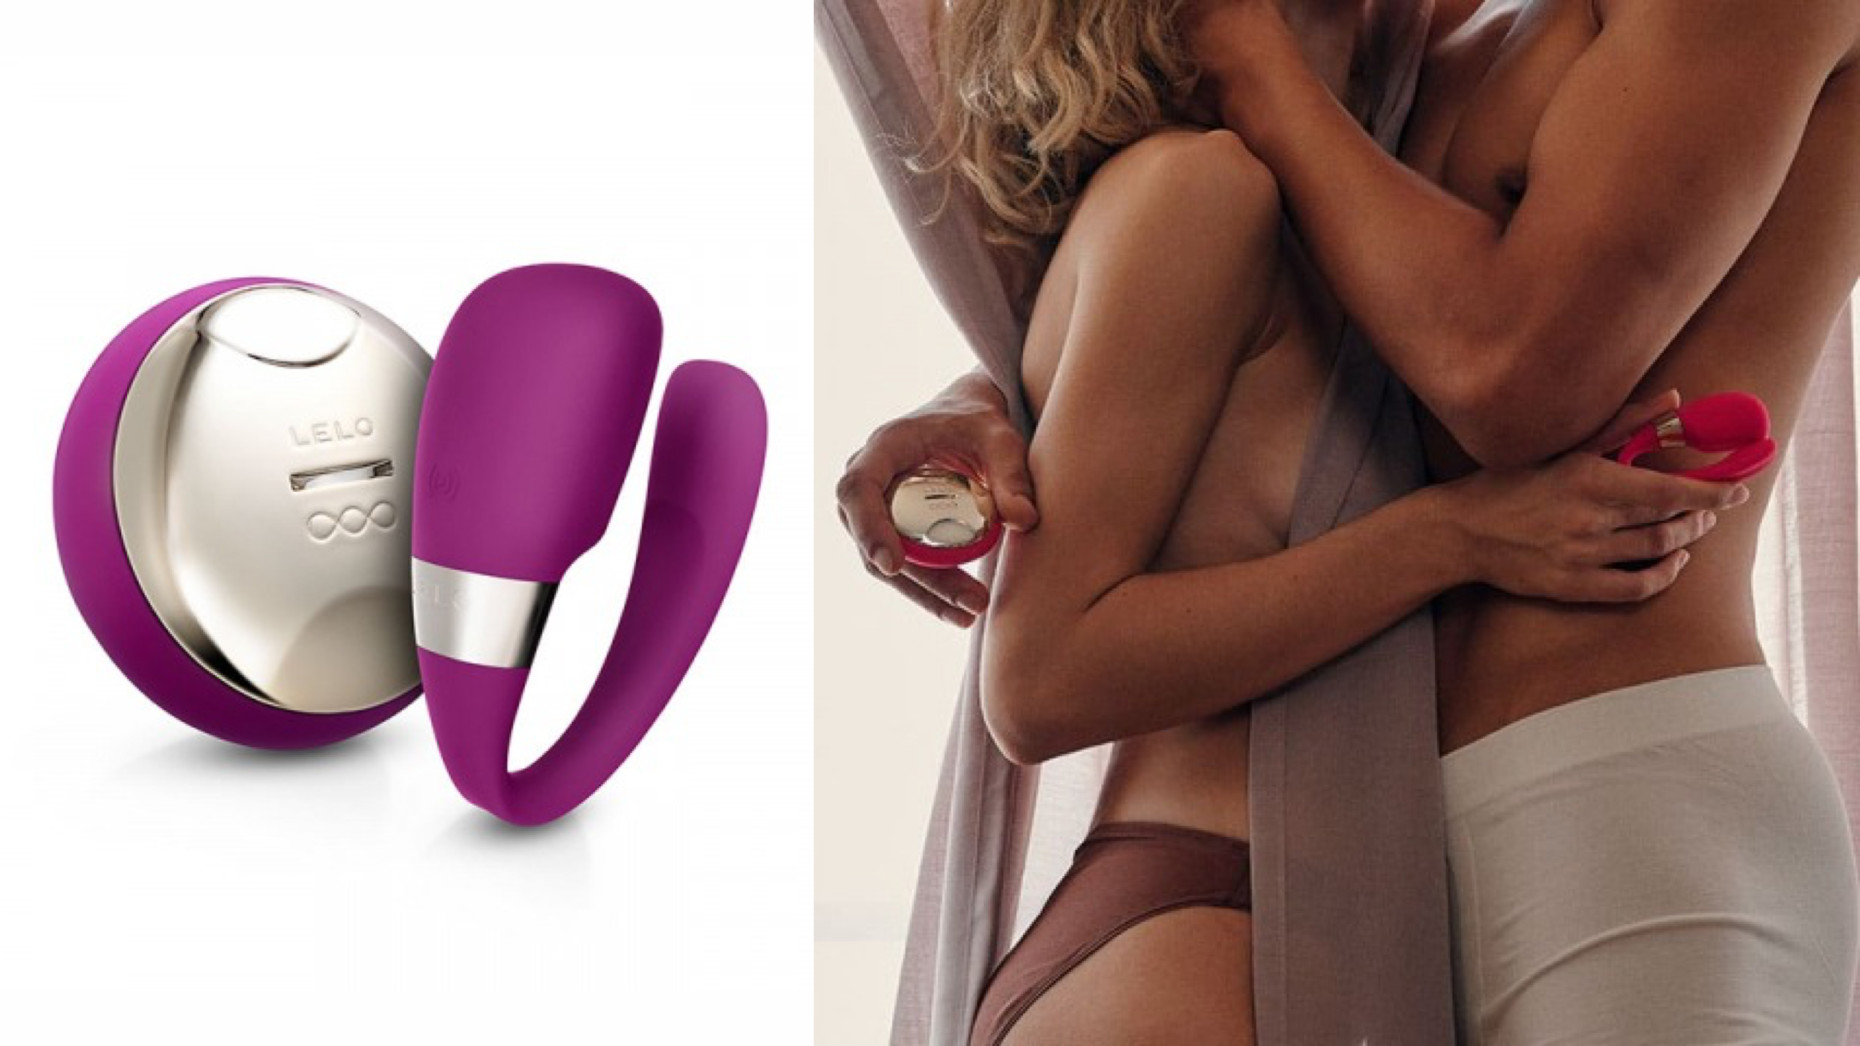 The Best Sex Toys for Couples | theSkimm